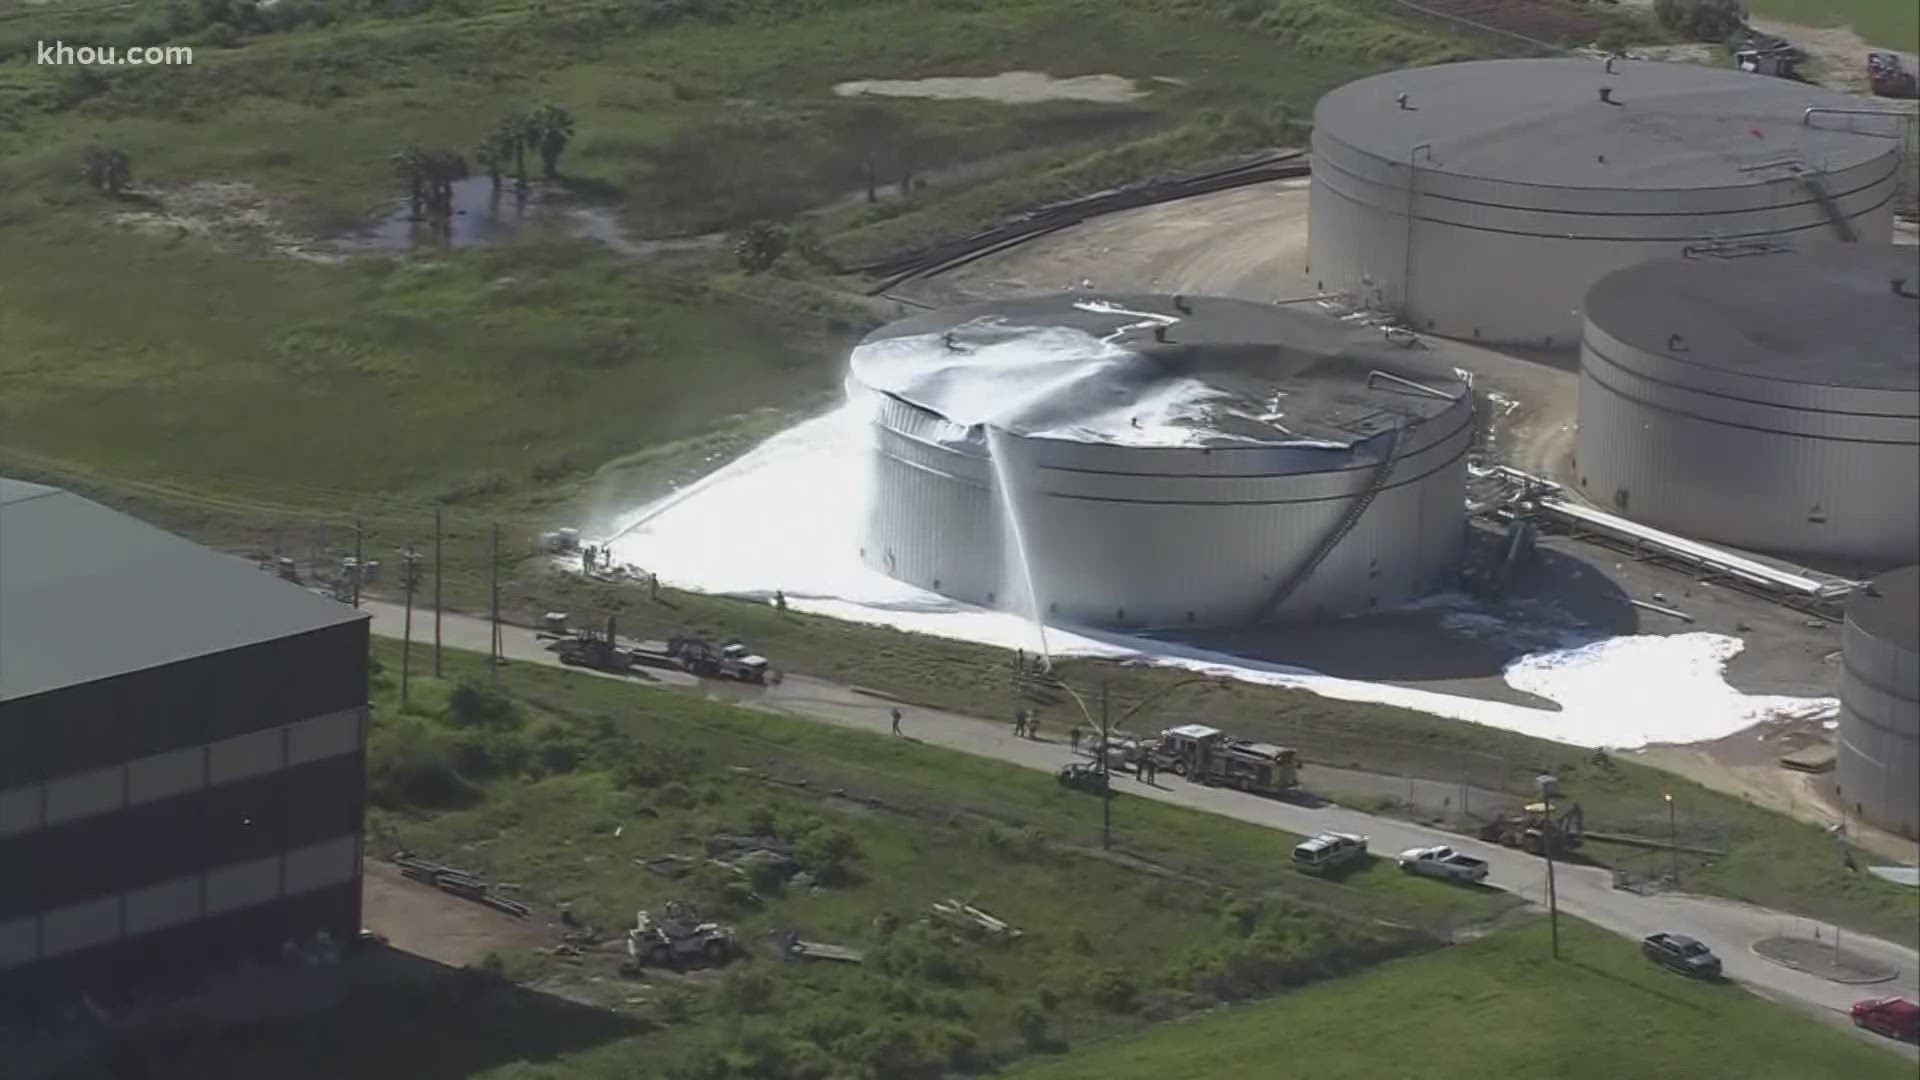 Two workers were injured Tuesday, May 19, 2020, in an oil tank explosion on Pelican Island, which is near Galveston Island.